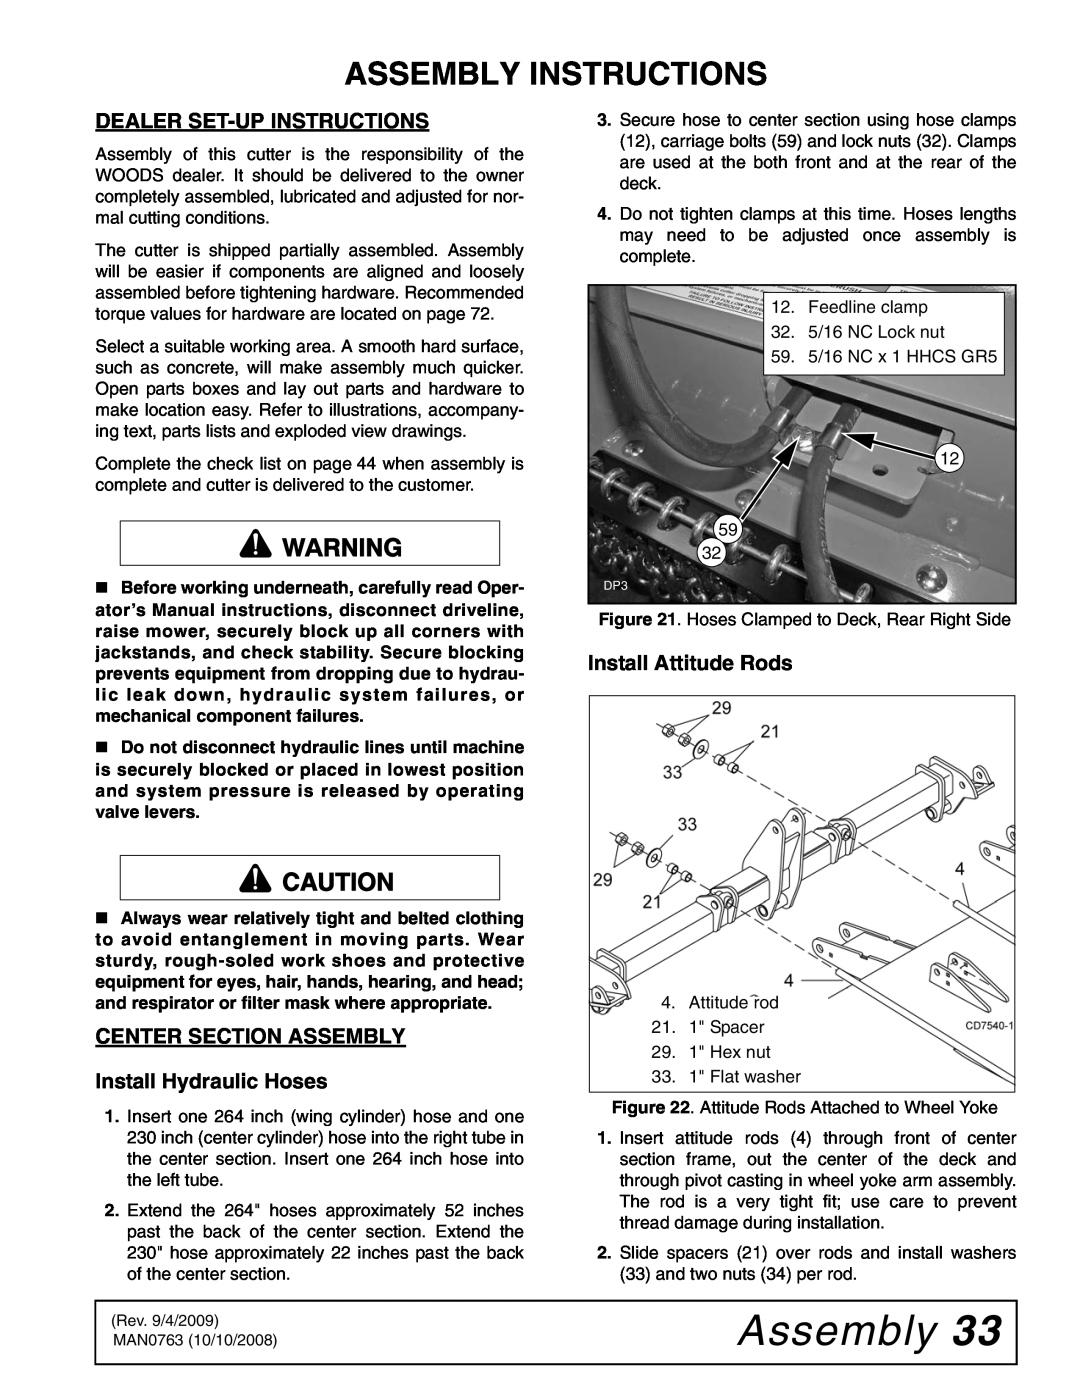 Woods Equipment BW240HDQ manual Assembly Instructions, Dealer Set-Up Instructions, Install Attitude Rods 